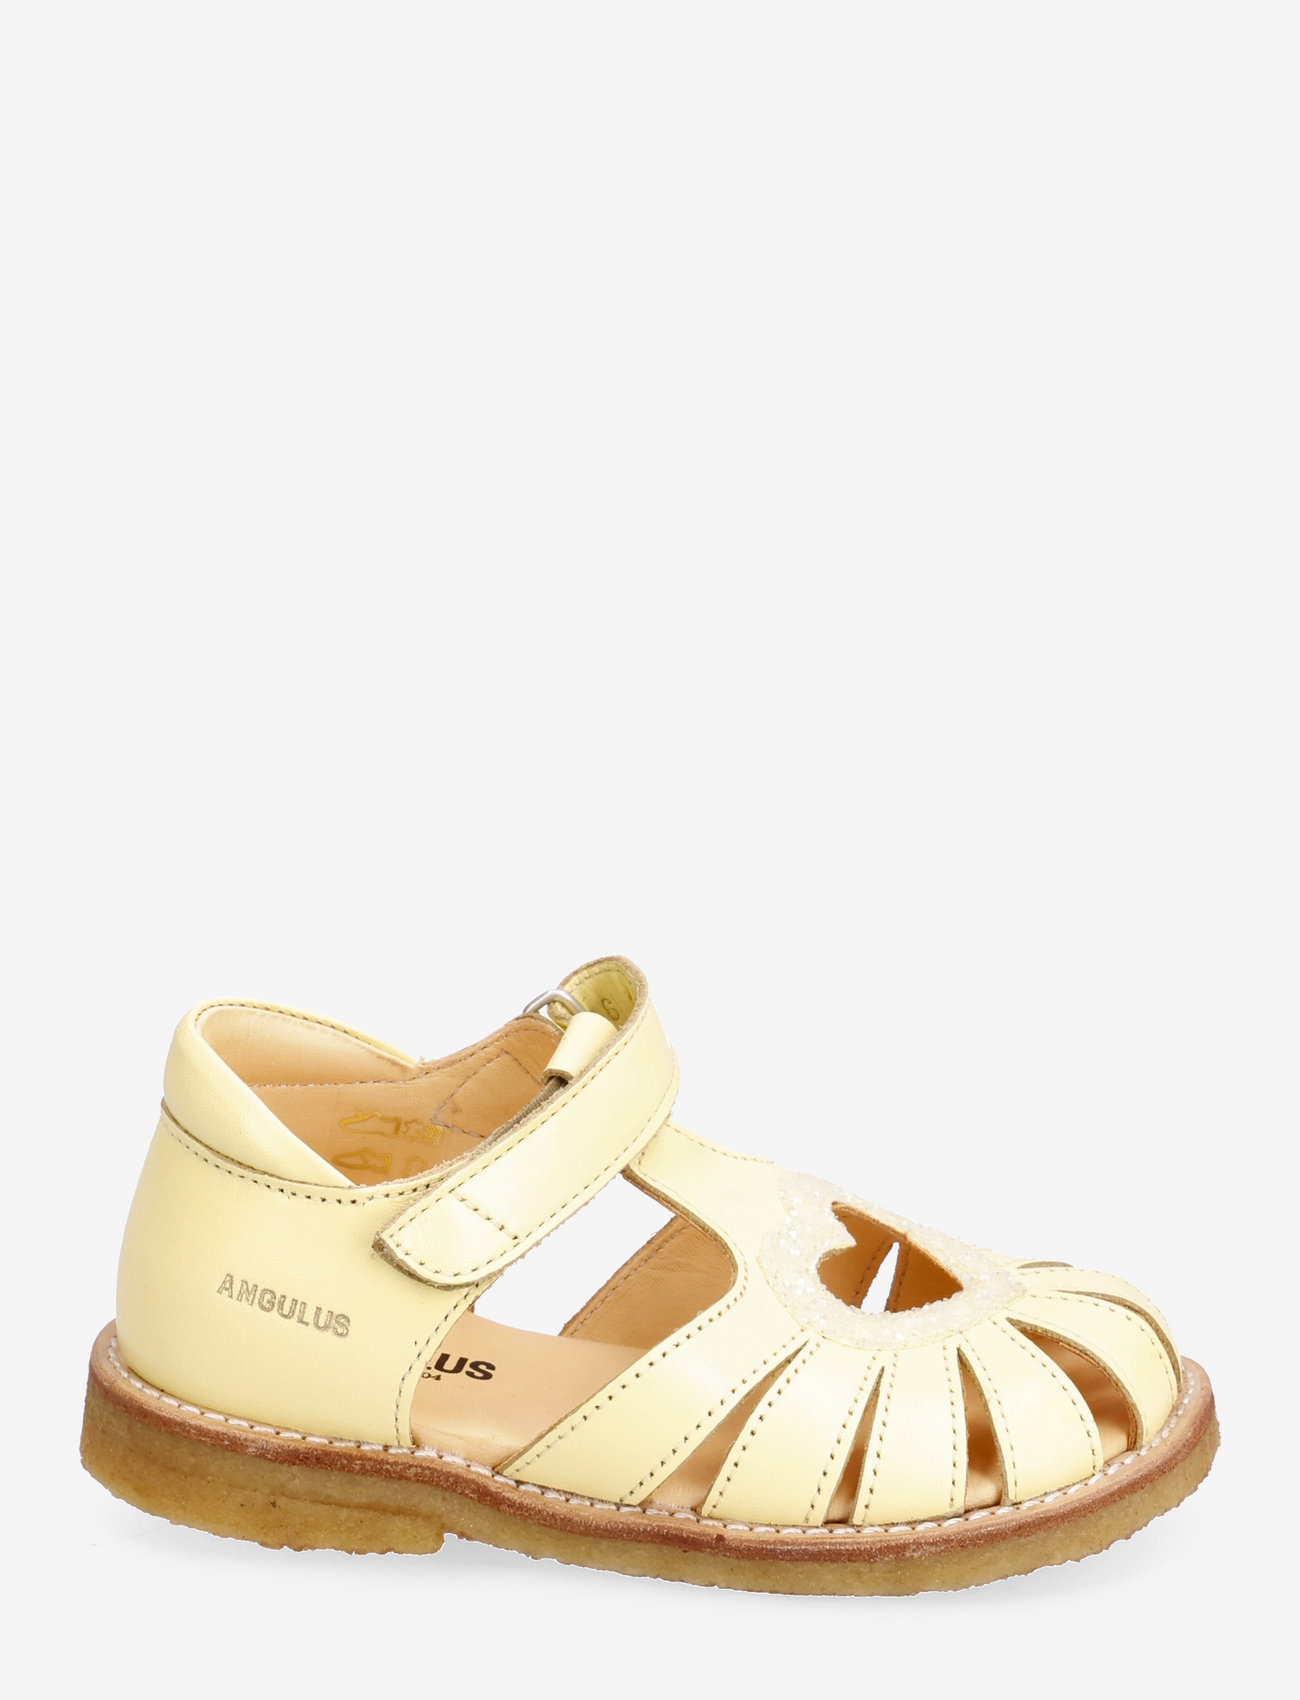 ANGULUS - Sandals - flat - closed toe - - zomerkoopjes - 1495/2696 ligth yellow/ligth y - 1